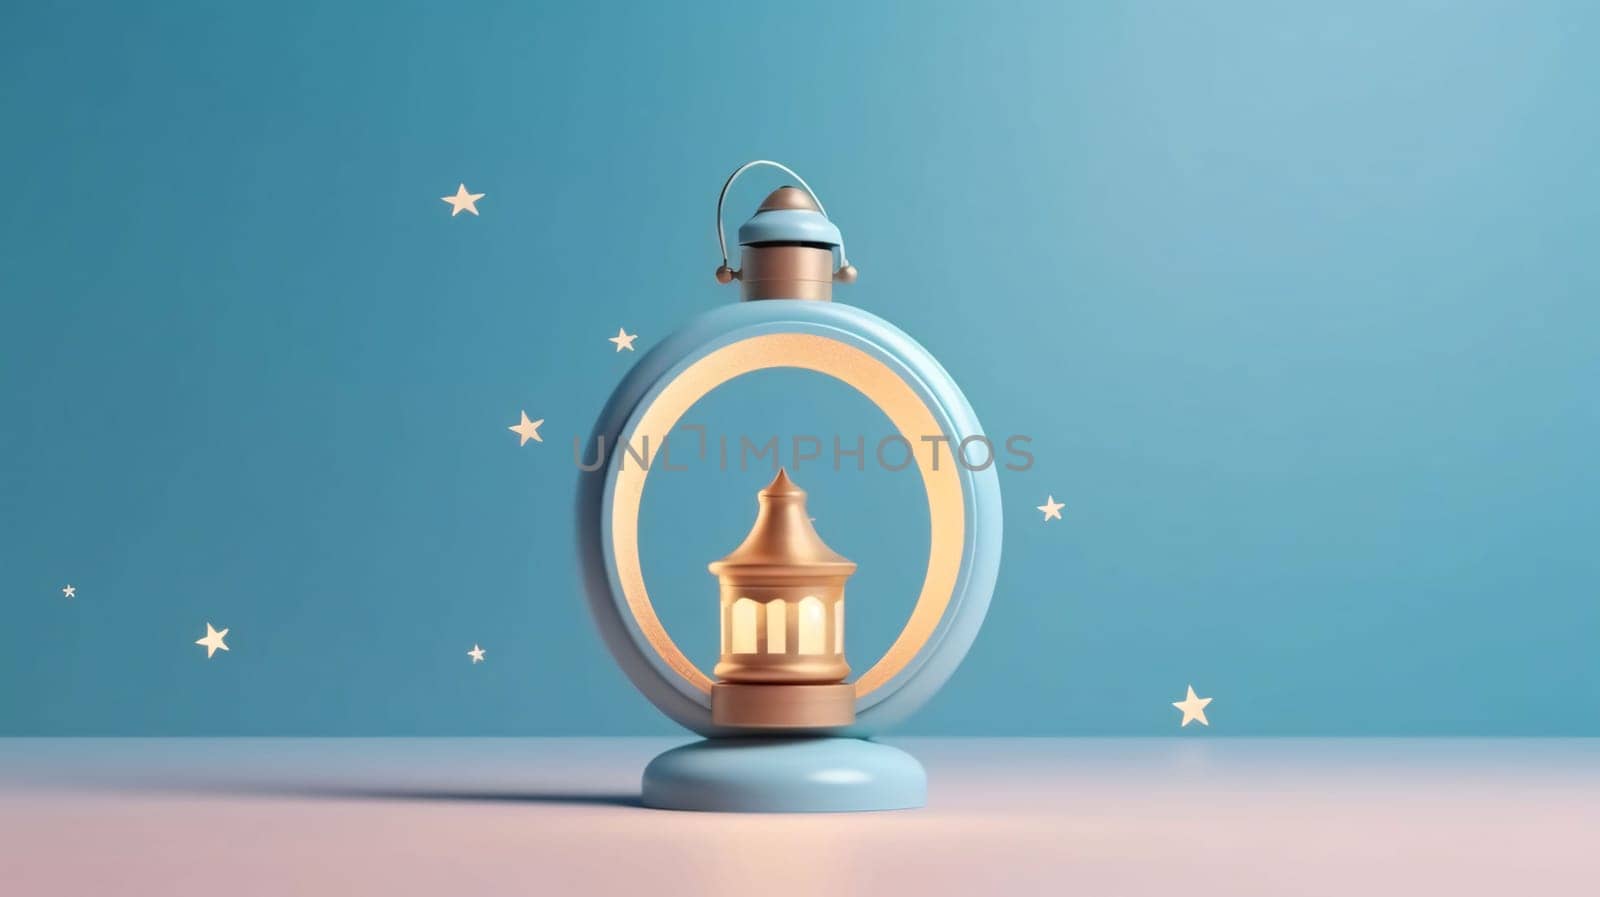 Ramadan Kareem background with lantern and stars. 3d rendering by ThemesS